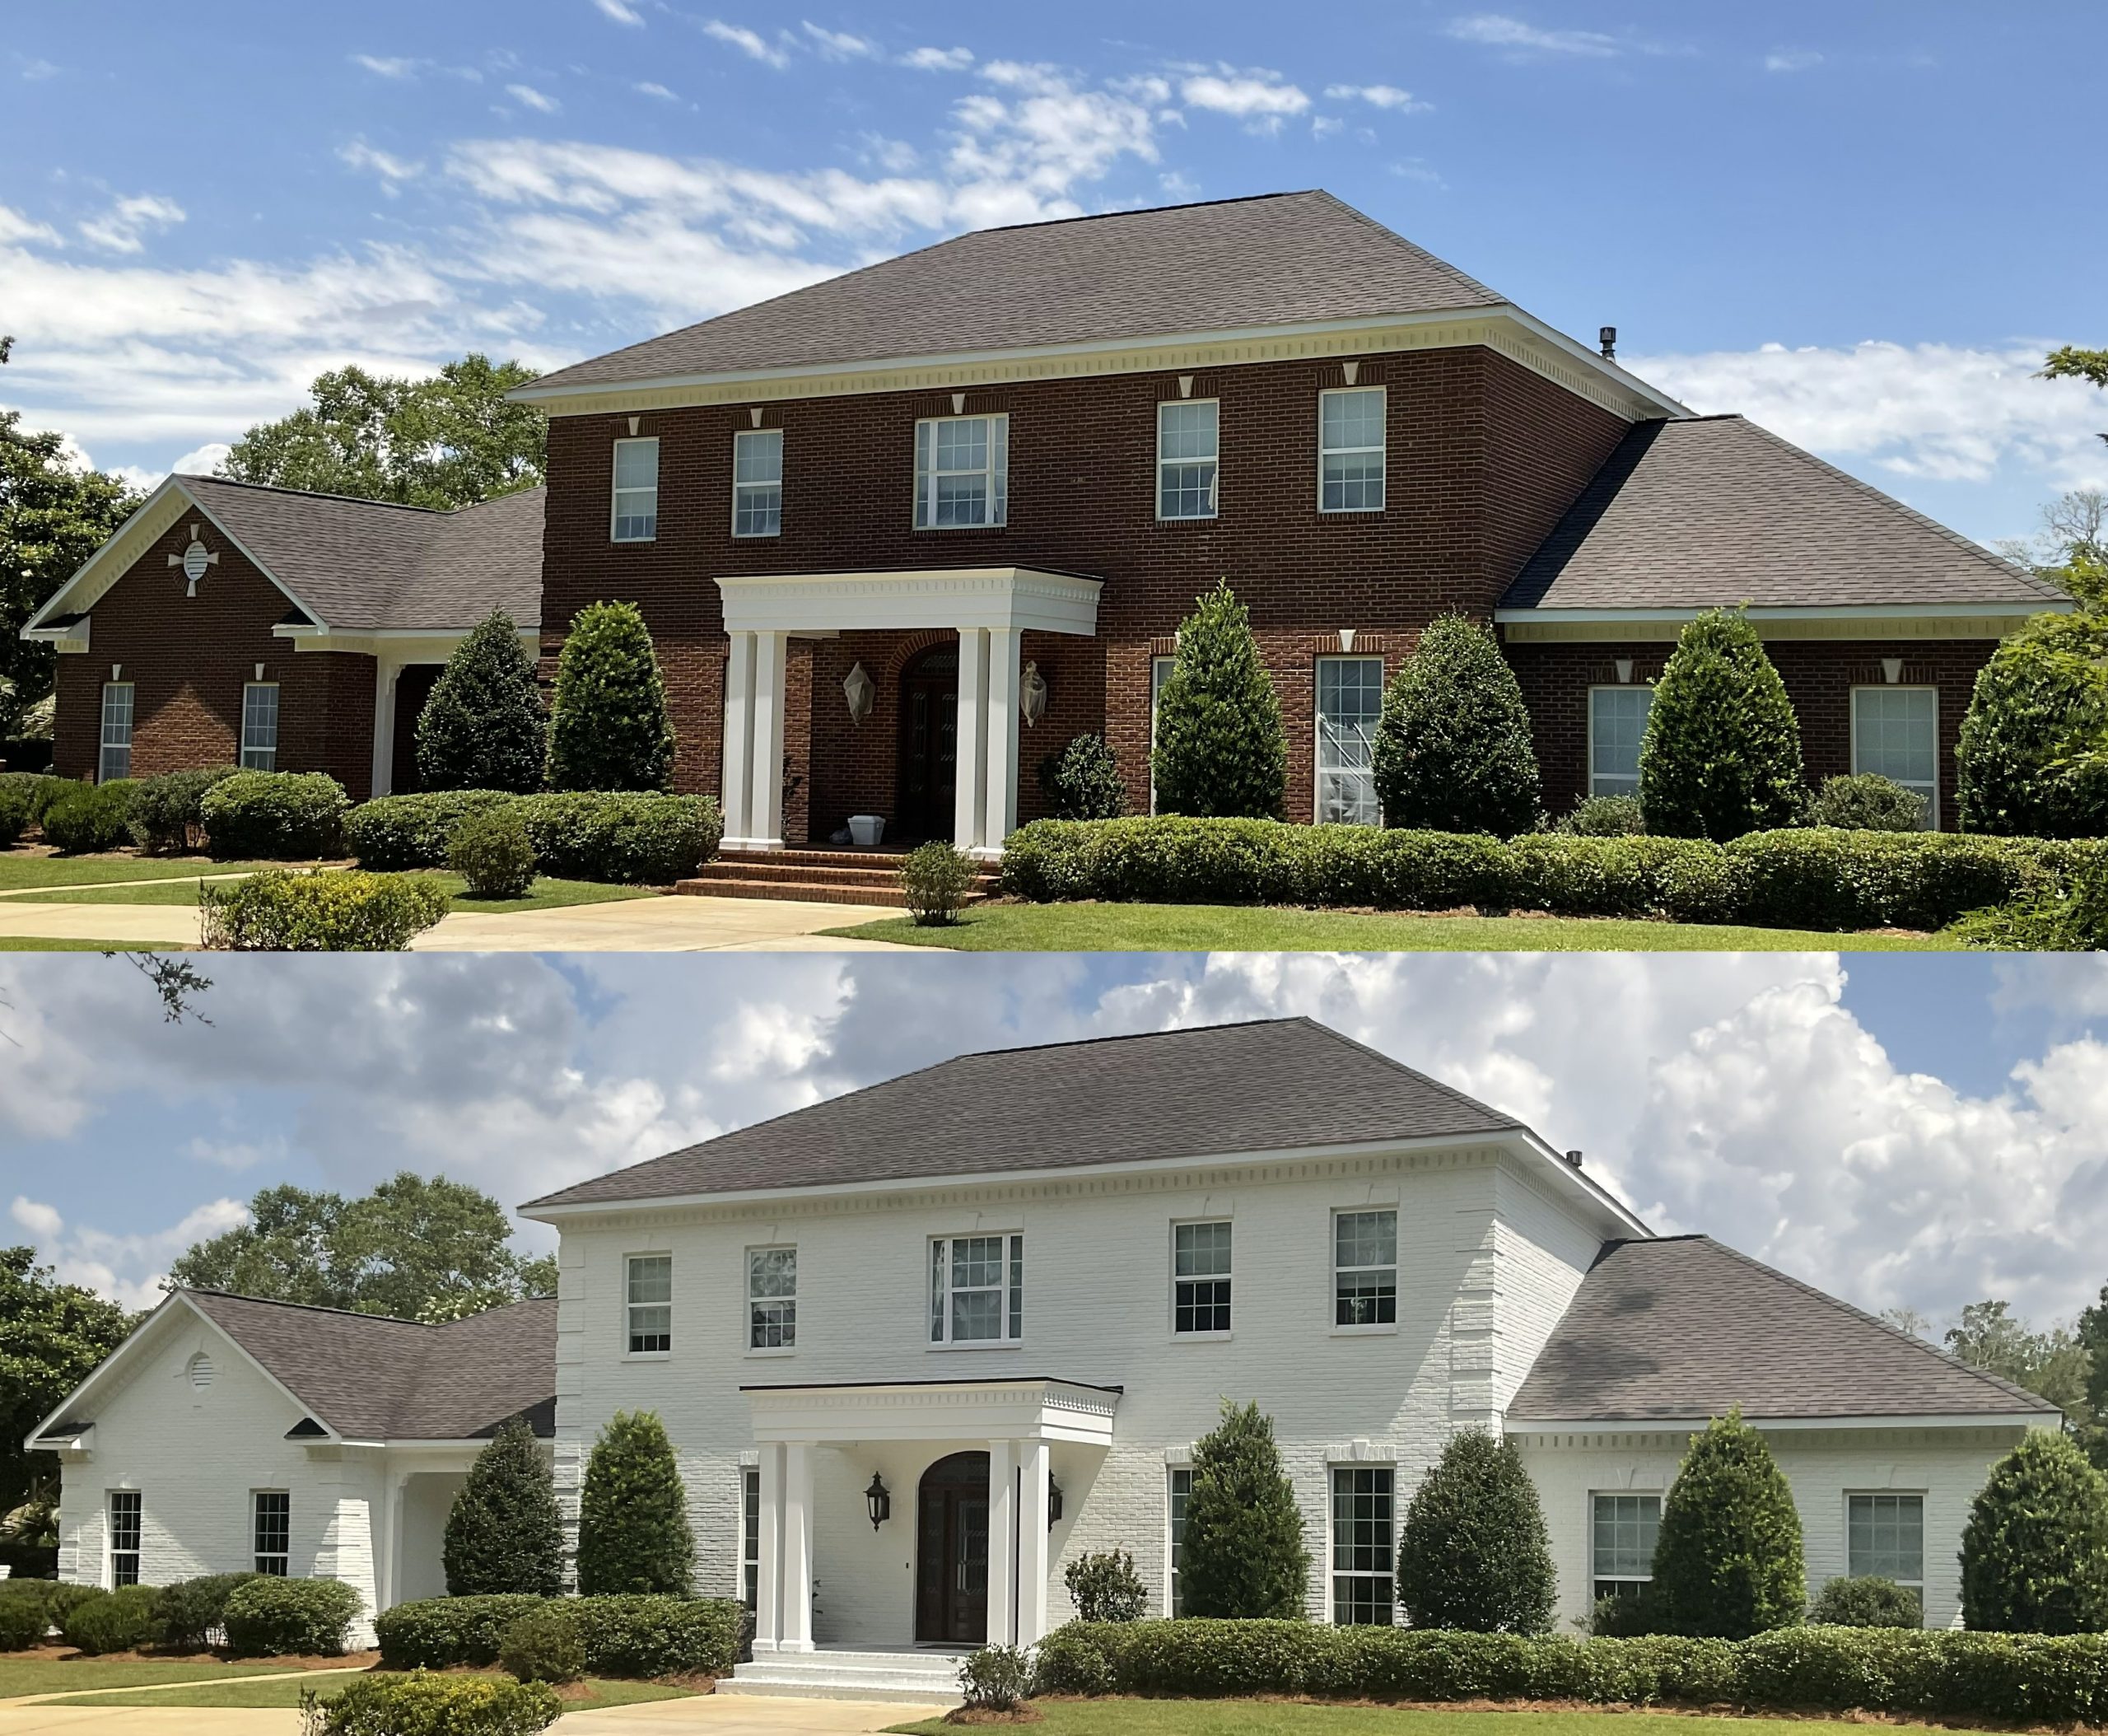 Painters in Mobile, AL | CertaPro Painters® of Mobile and Baldwin Counties